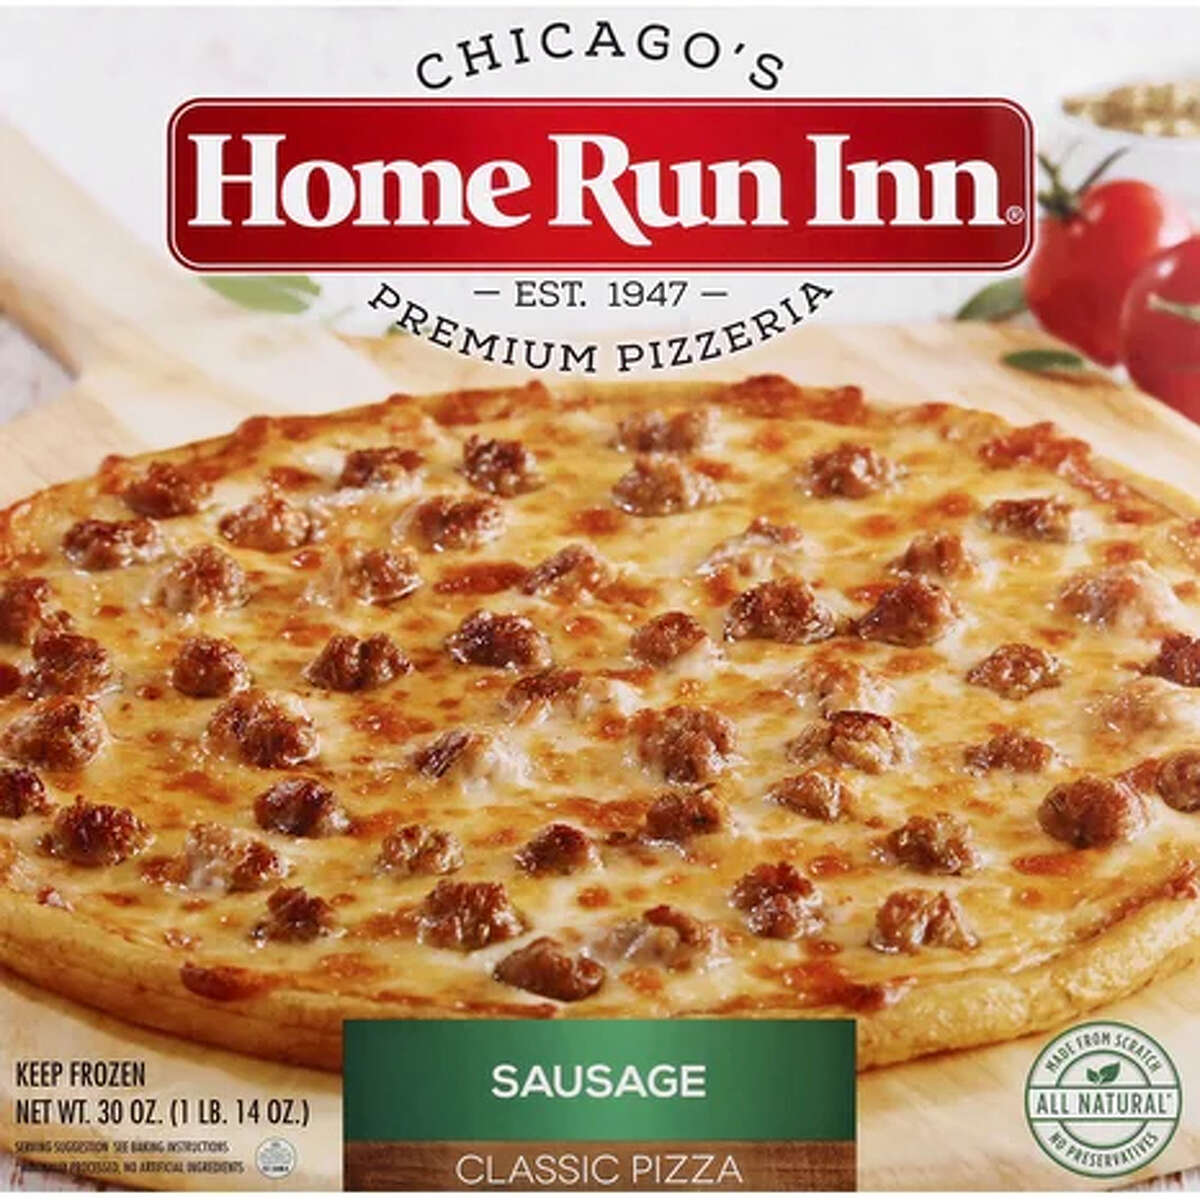 An Illinois pizza-maker is recalling more than 13,000 pounds of its product over worries it might contain pieces of metal.